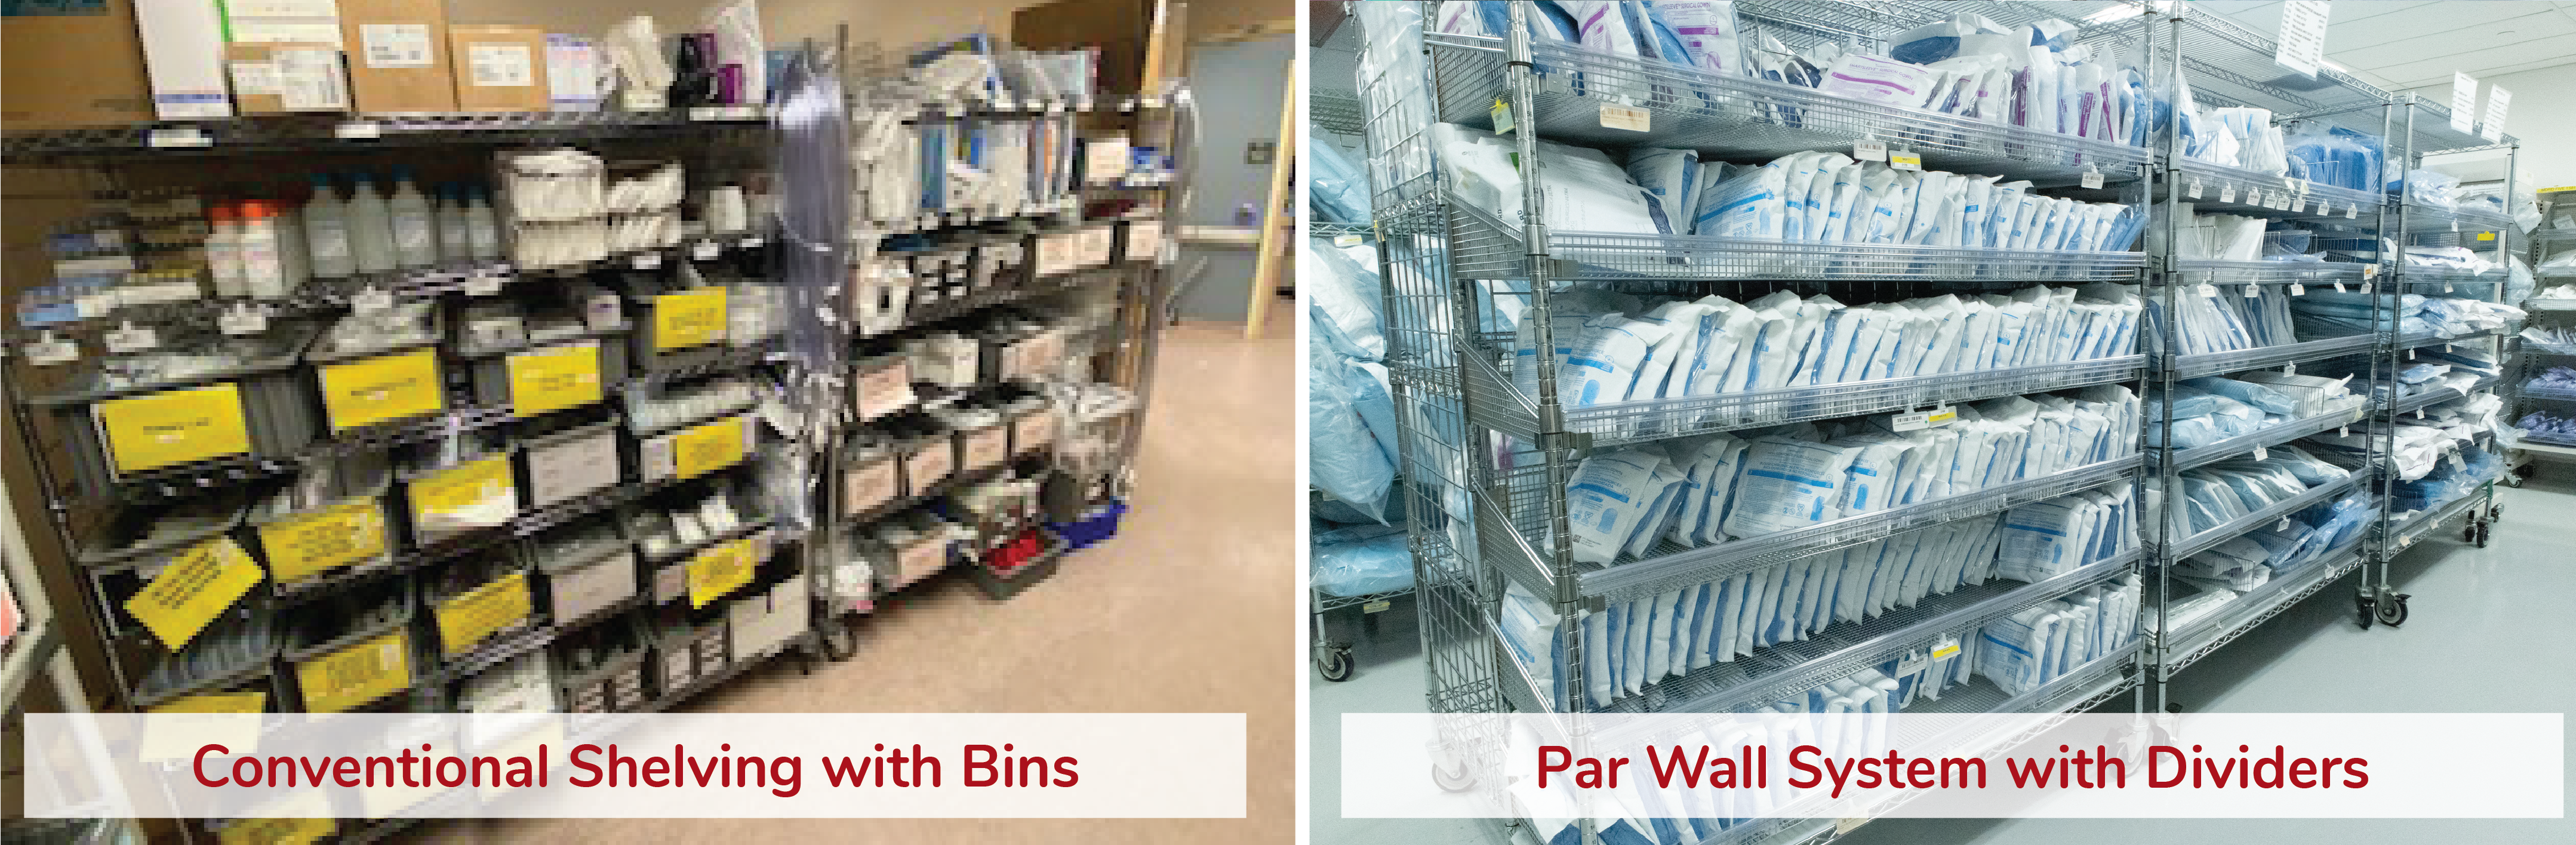 Second image comparison of Conventional Shelving with Bins and Par Wall System with Dividers